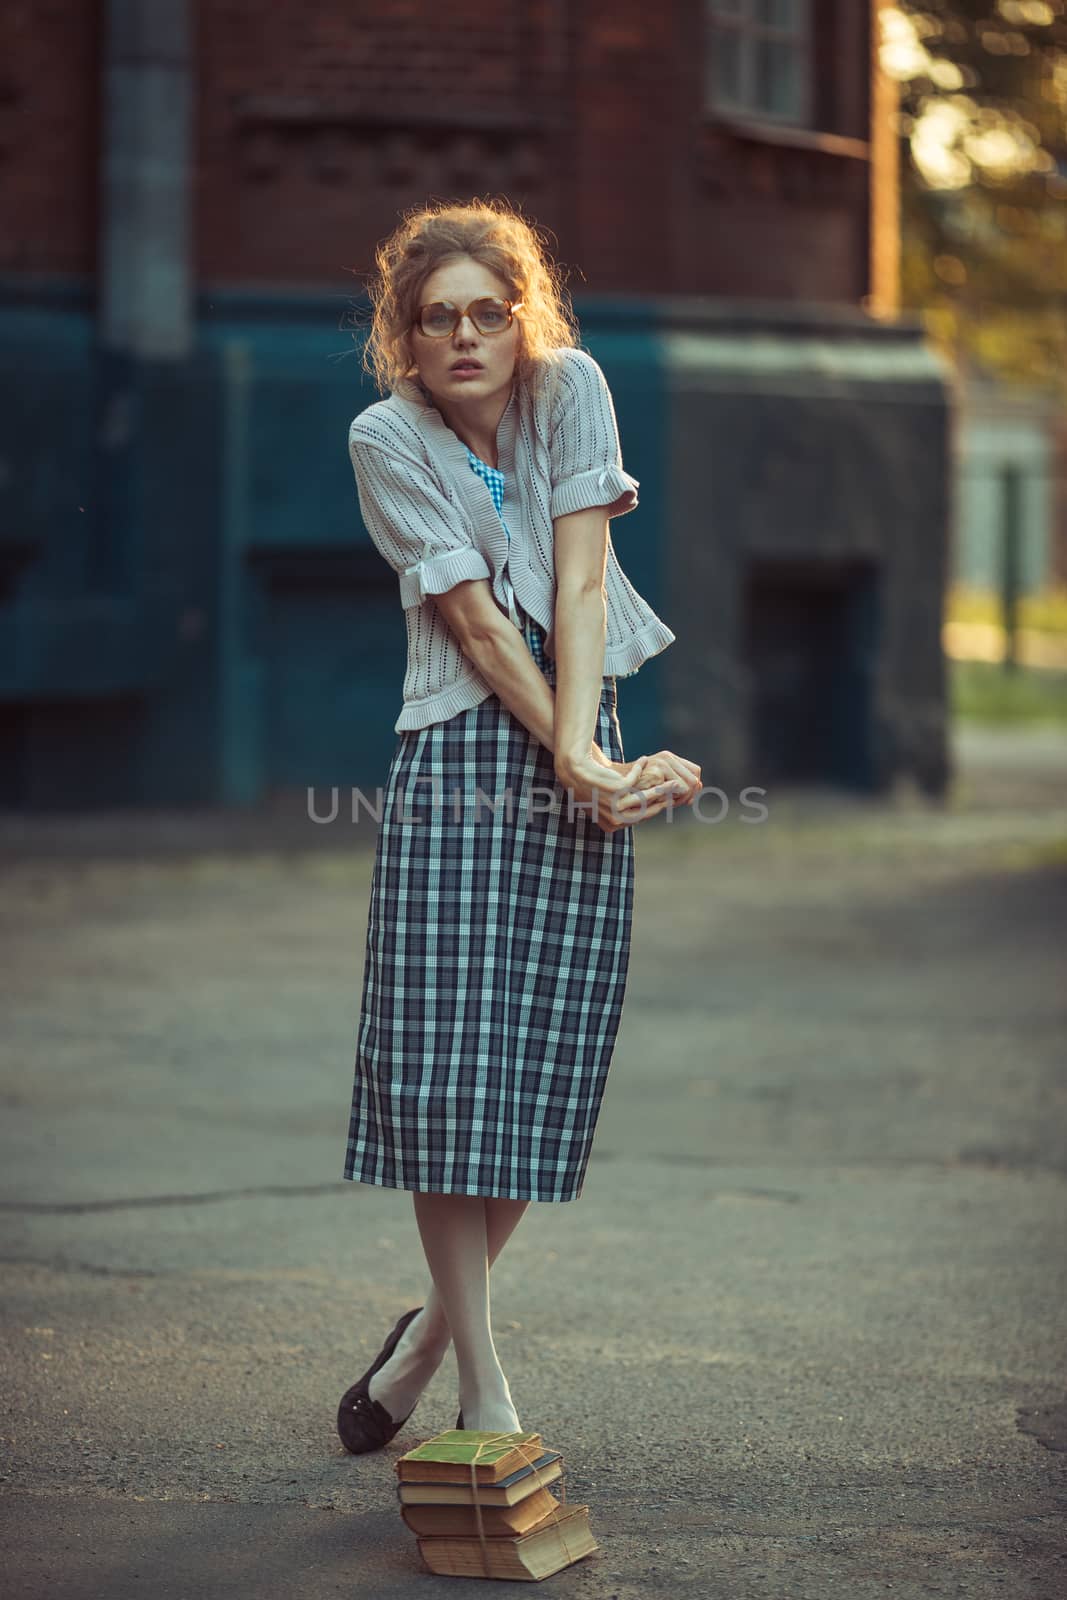 Funny girl with glasses and a vintage dress by vlad_star